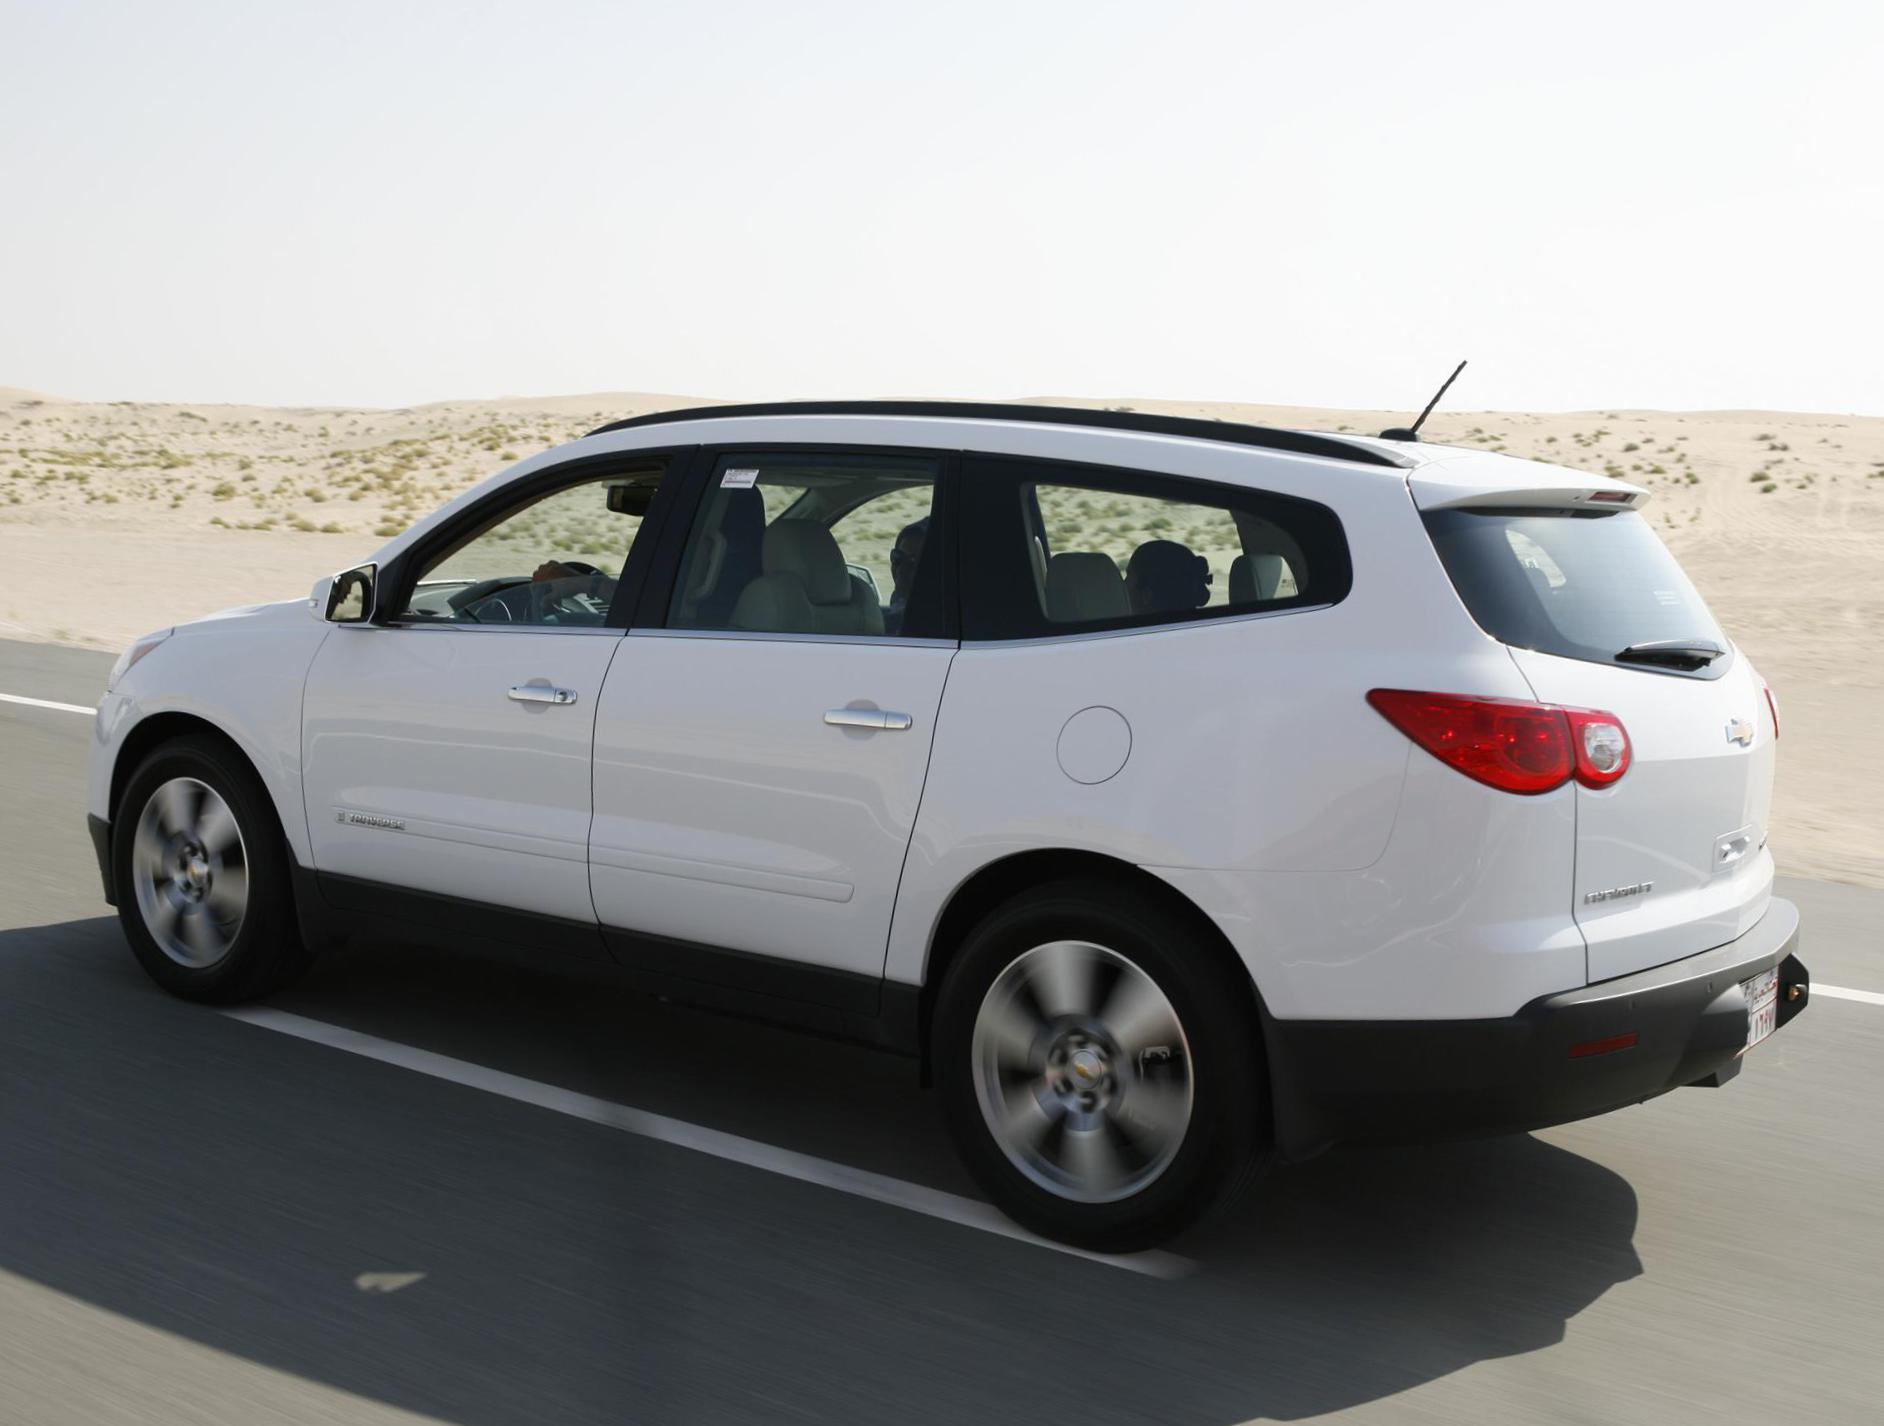 Traverse Chevrolet approved 2010